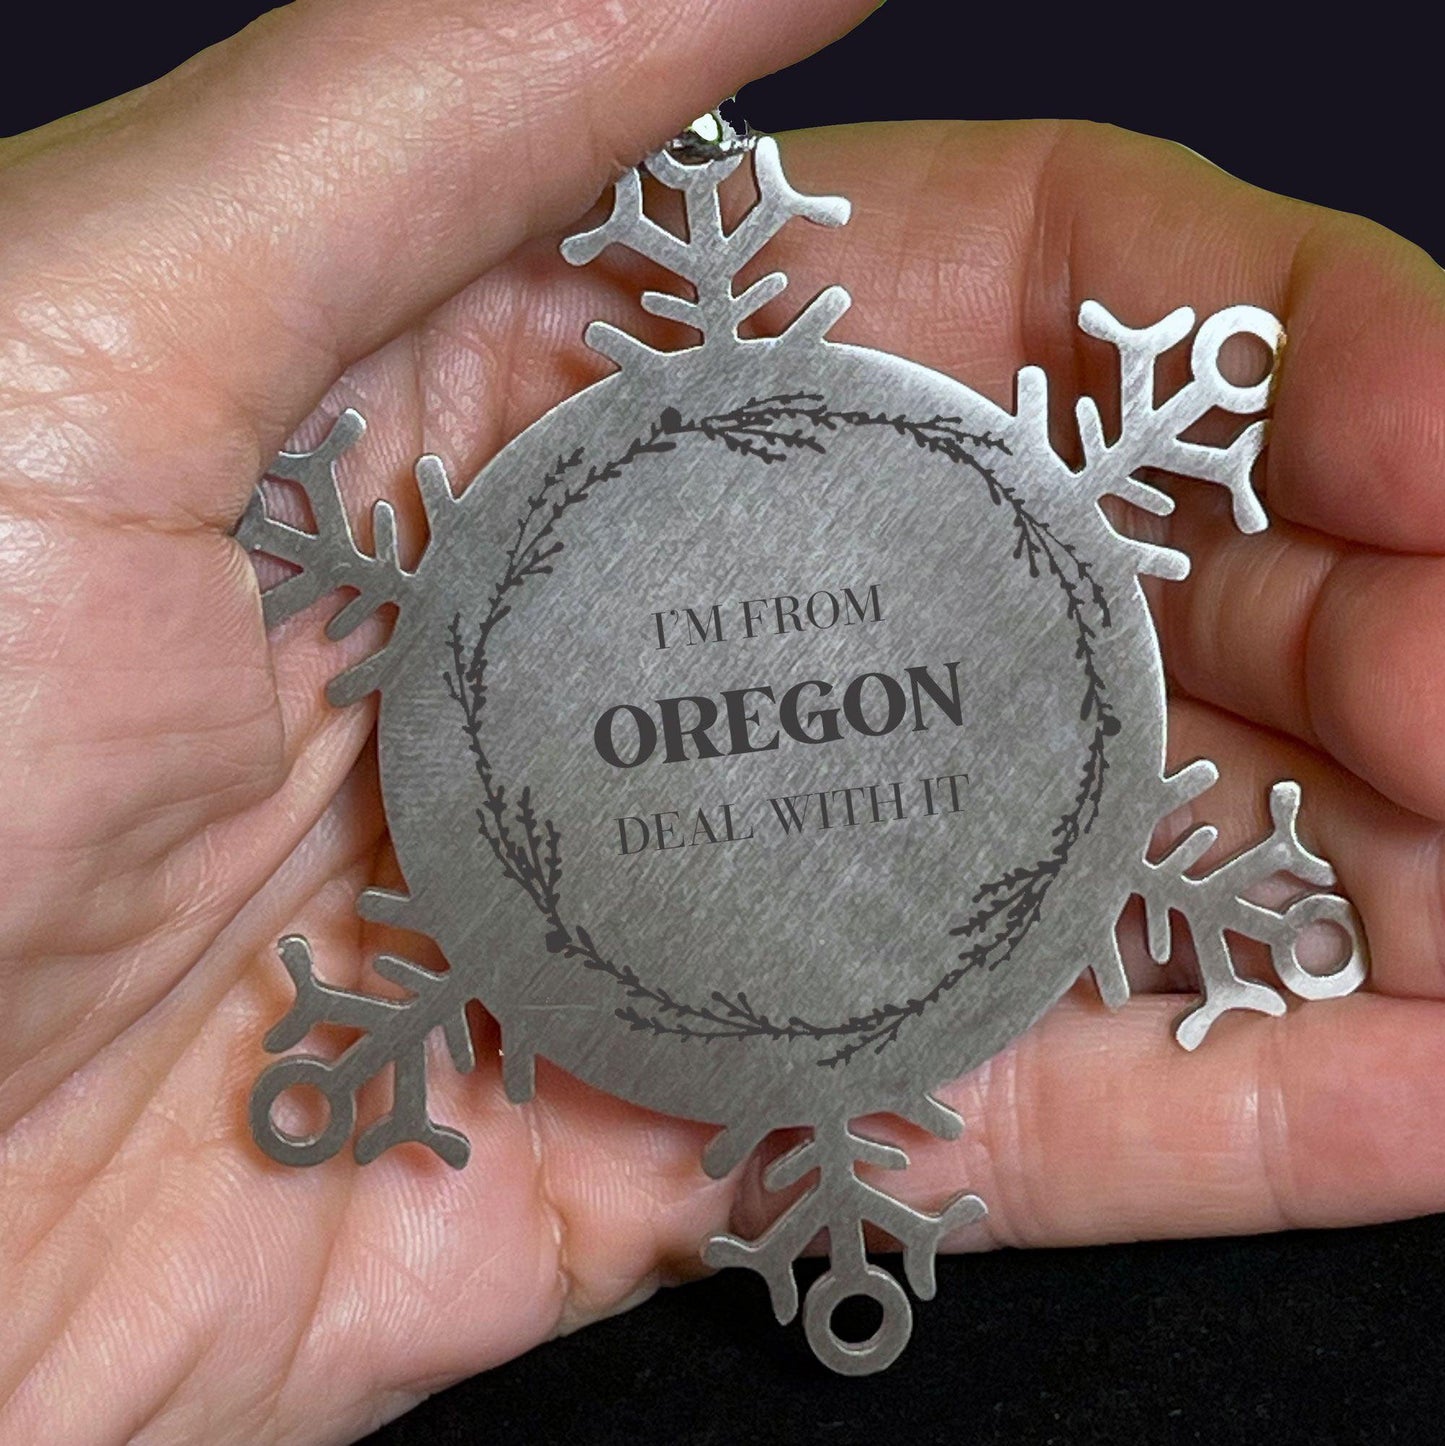 I'm from Oregon, Deal with it, Proud Oregon State Ornament Gifts, Oregon Snowflake Ornament Gift Idea, Christmas Gifts for Oregon People, Coworkers, Colleague - Mallard Moon Gift Shop